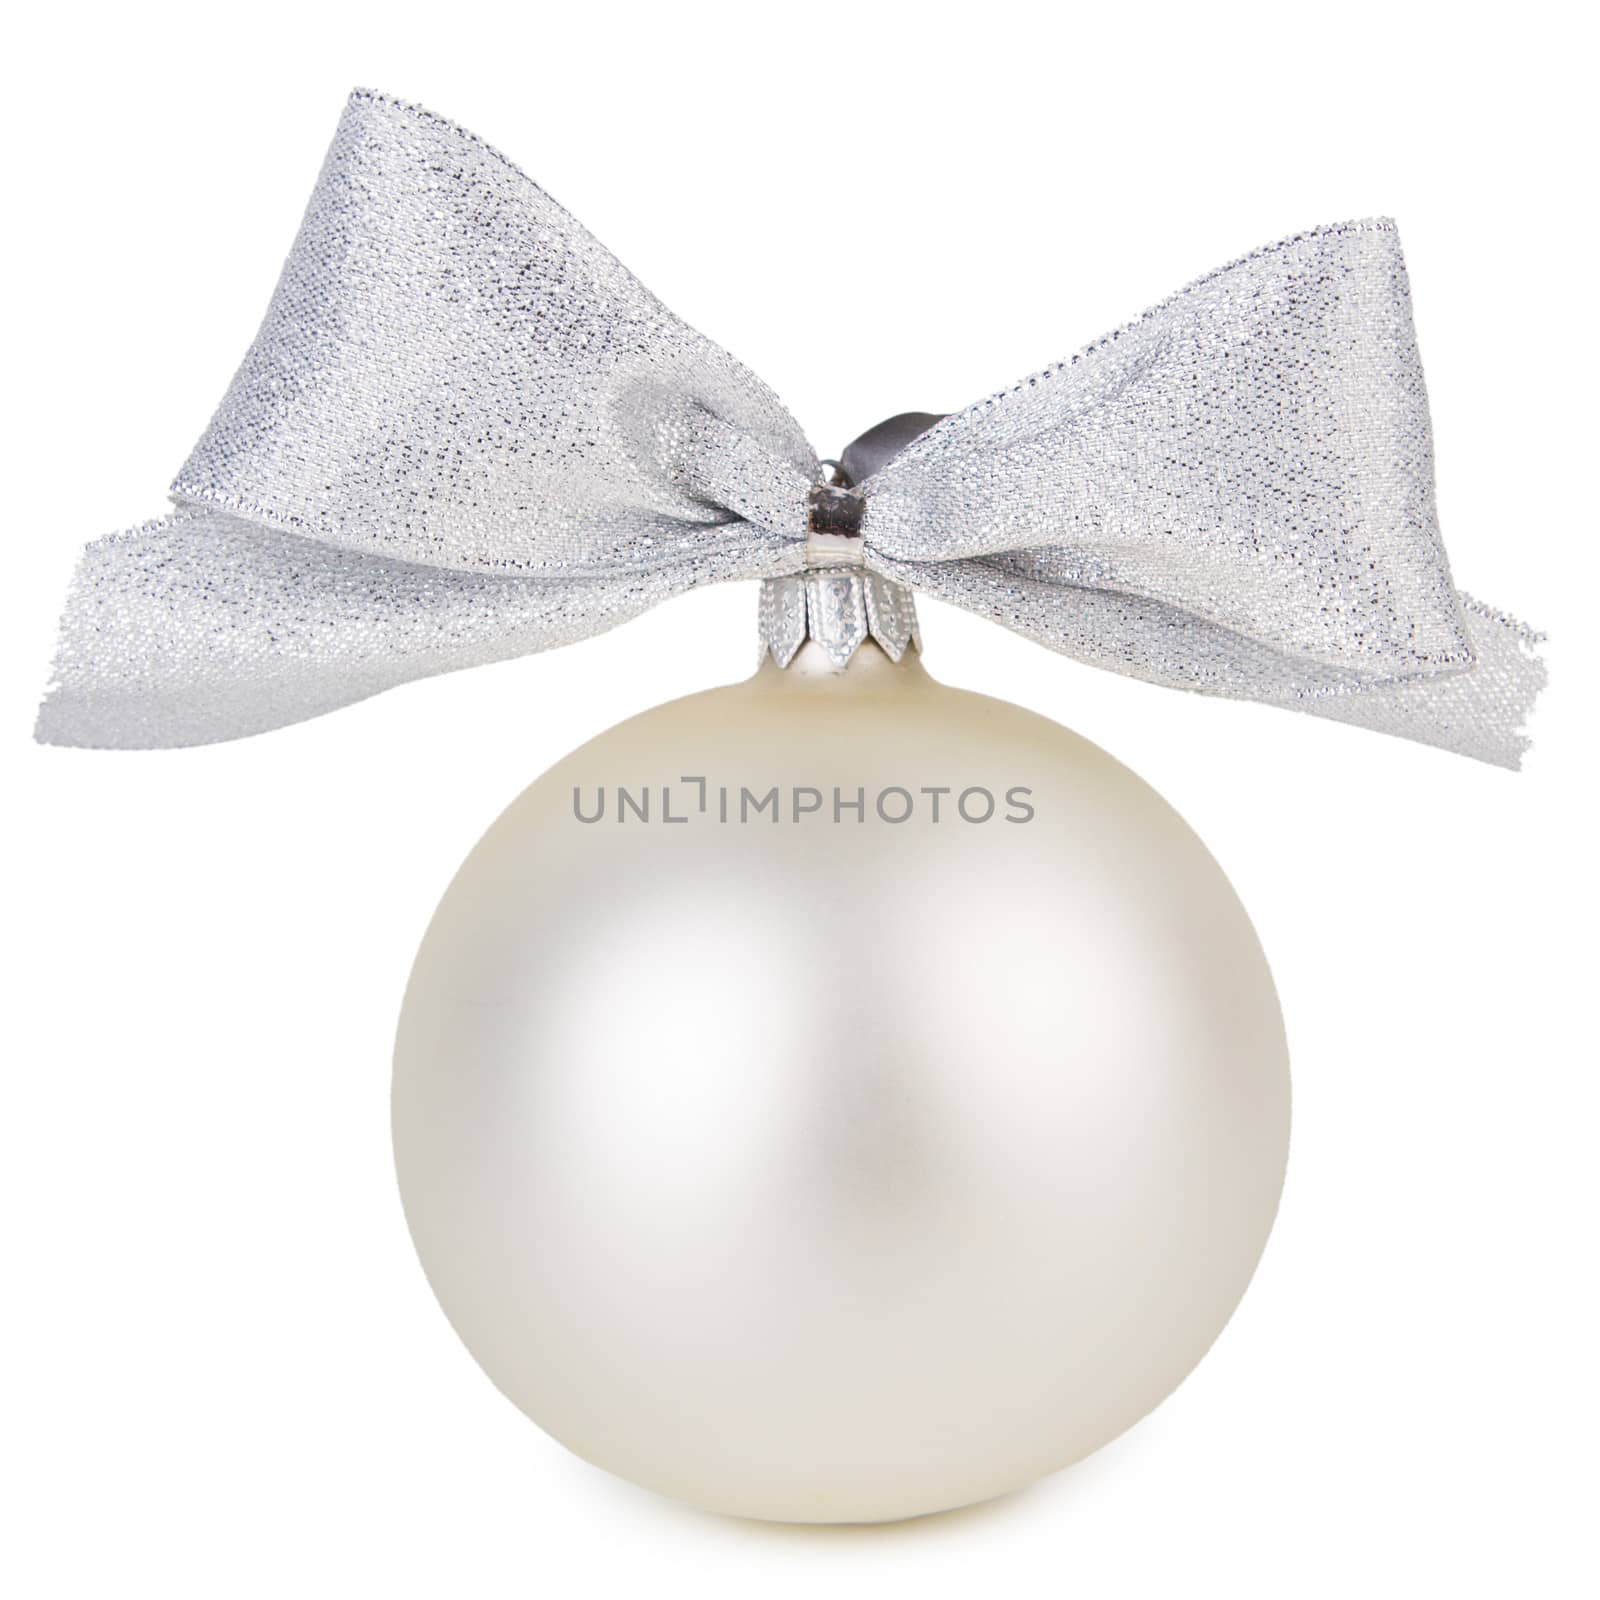 White Christmas ball isolated on a white background